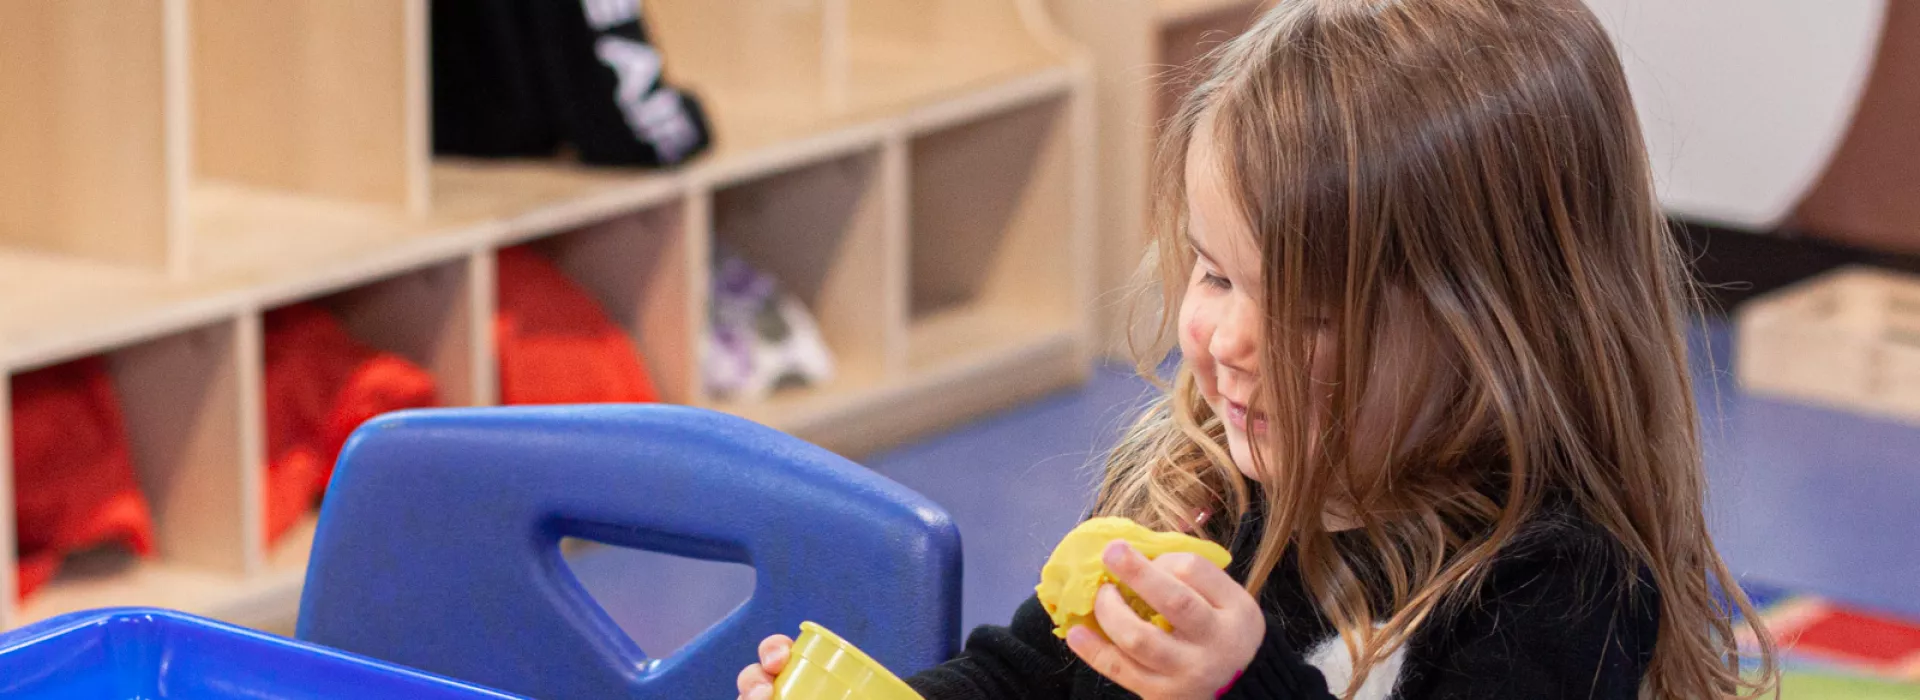 A preschool girl is playing with yellow Playdoh at a desk in a classroom. Cubbies are seen in the background behind her.